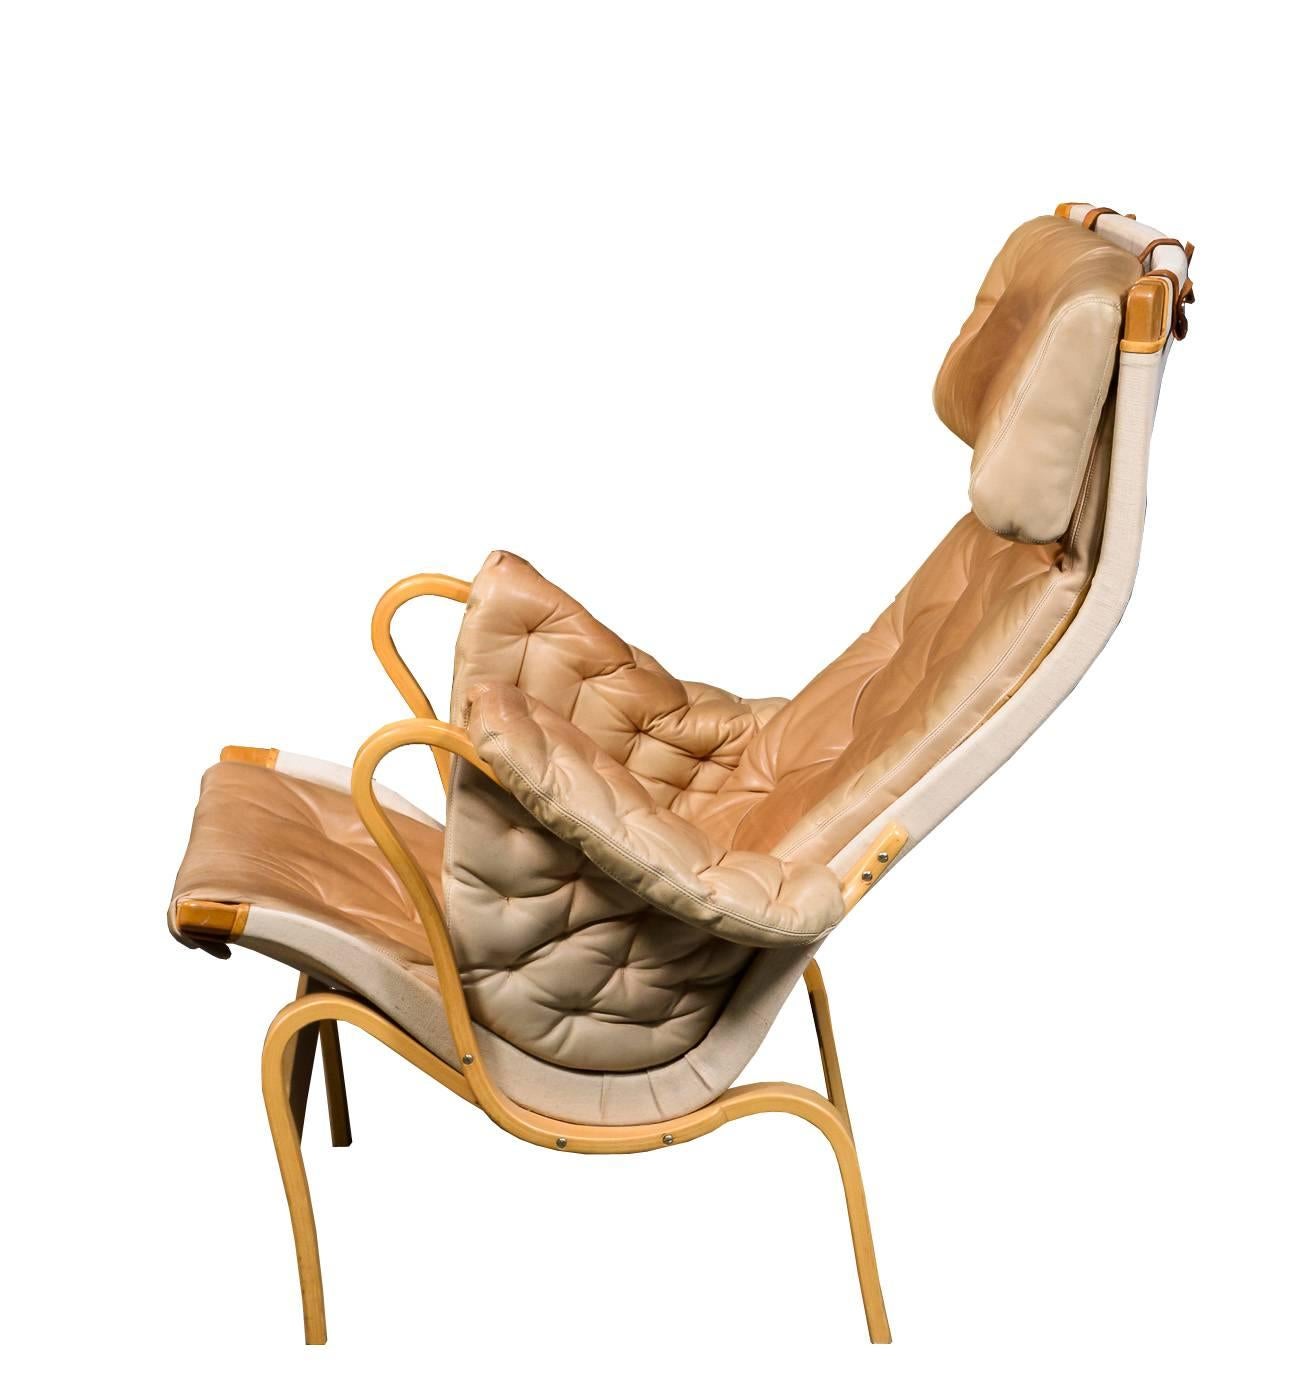 Model Pernilla armchair by designer Bruno Mathsson and produced by DUX. 

The chair has a laminated beechwood frame, stretched with canvas. The chair features its original cushions and armrests upholstered in beige buttoned leather.
   